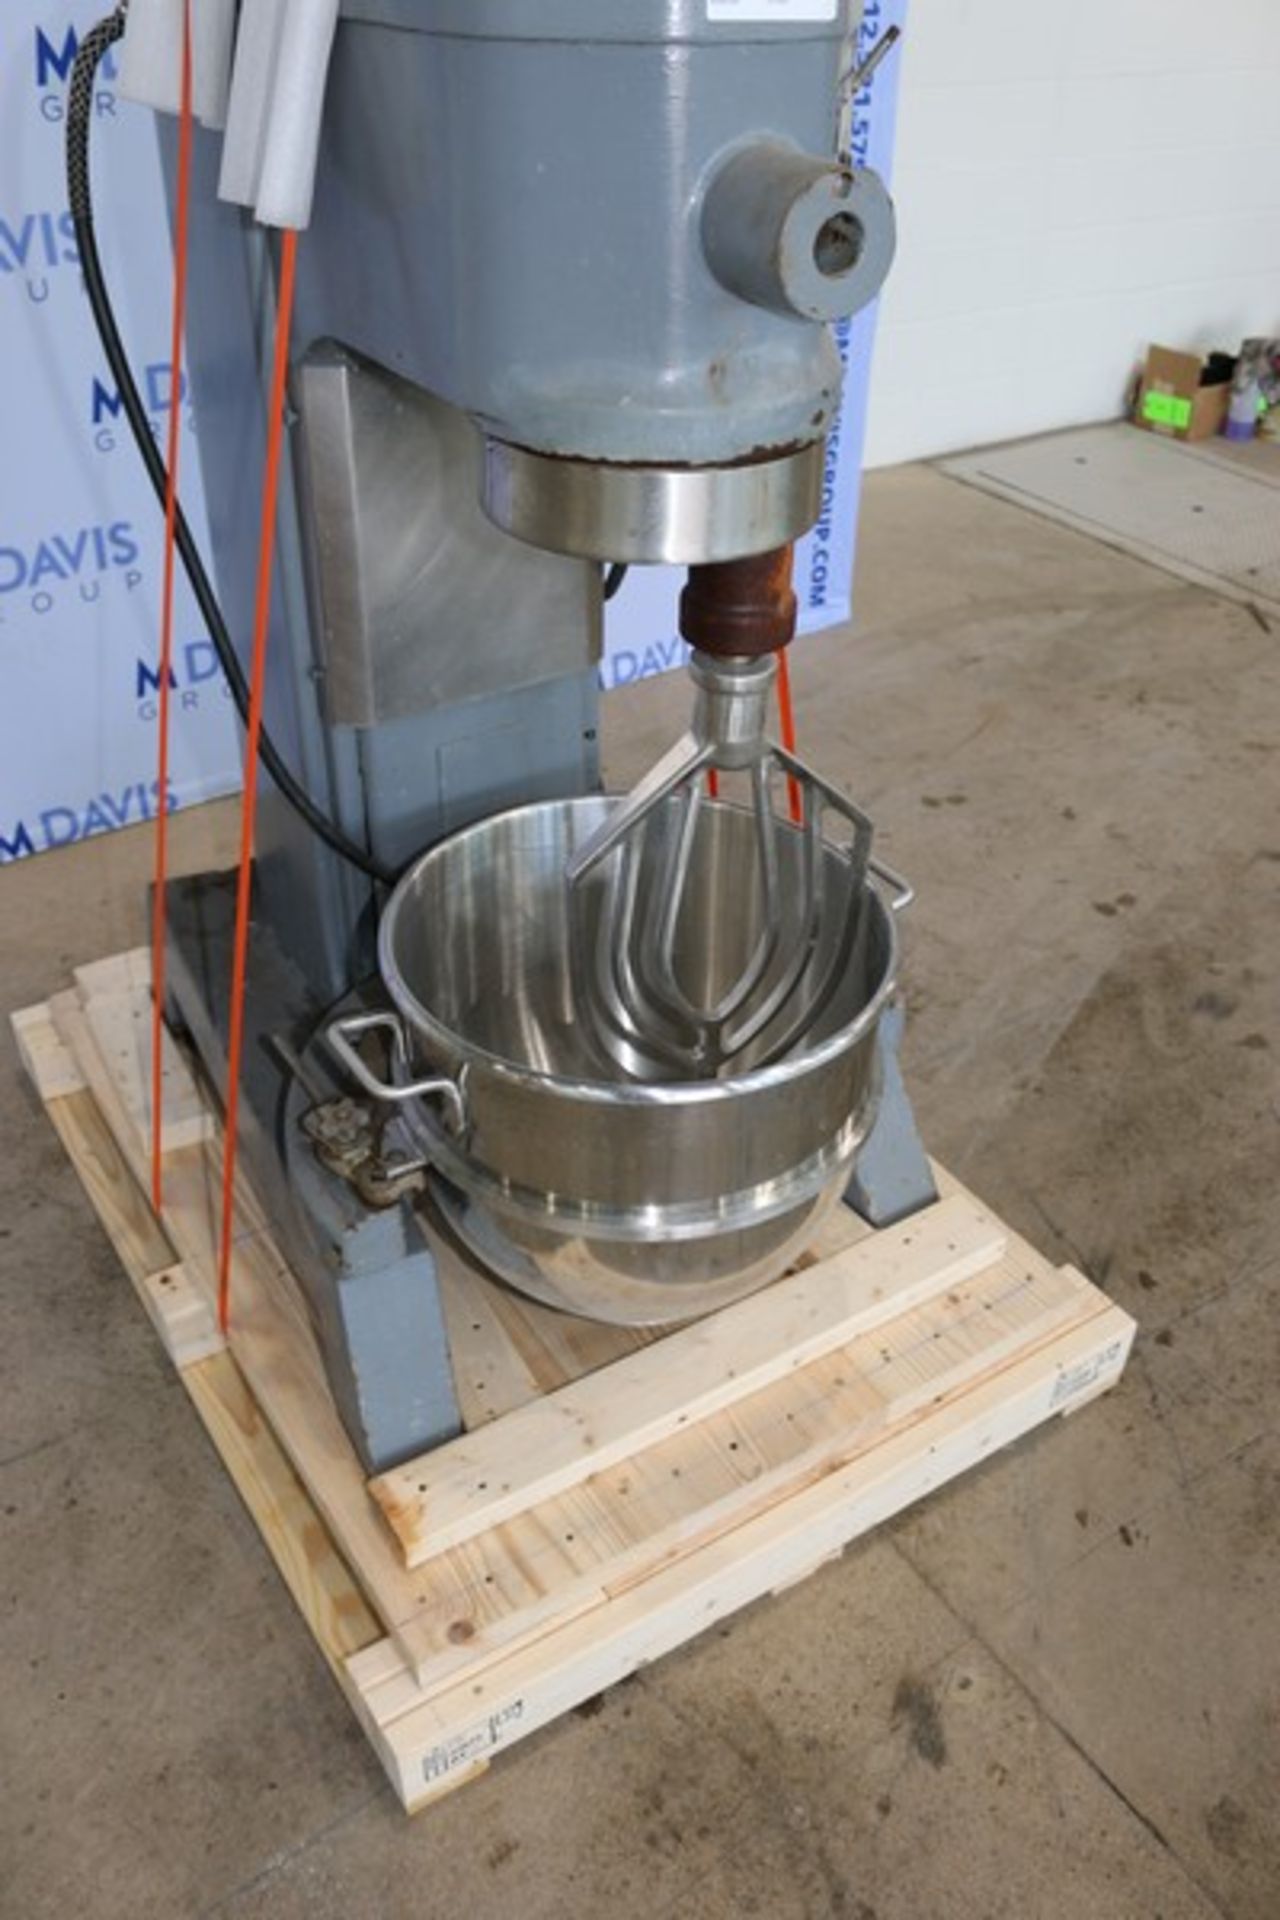 Hobart Mixer,M/N L-800, S/N 11-213-617, 200 Volts, 1725 RPM Motor, with 1-1/2 hp Motor, with S/S - Image 2 of 3